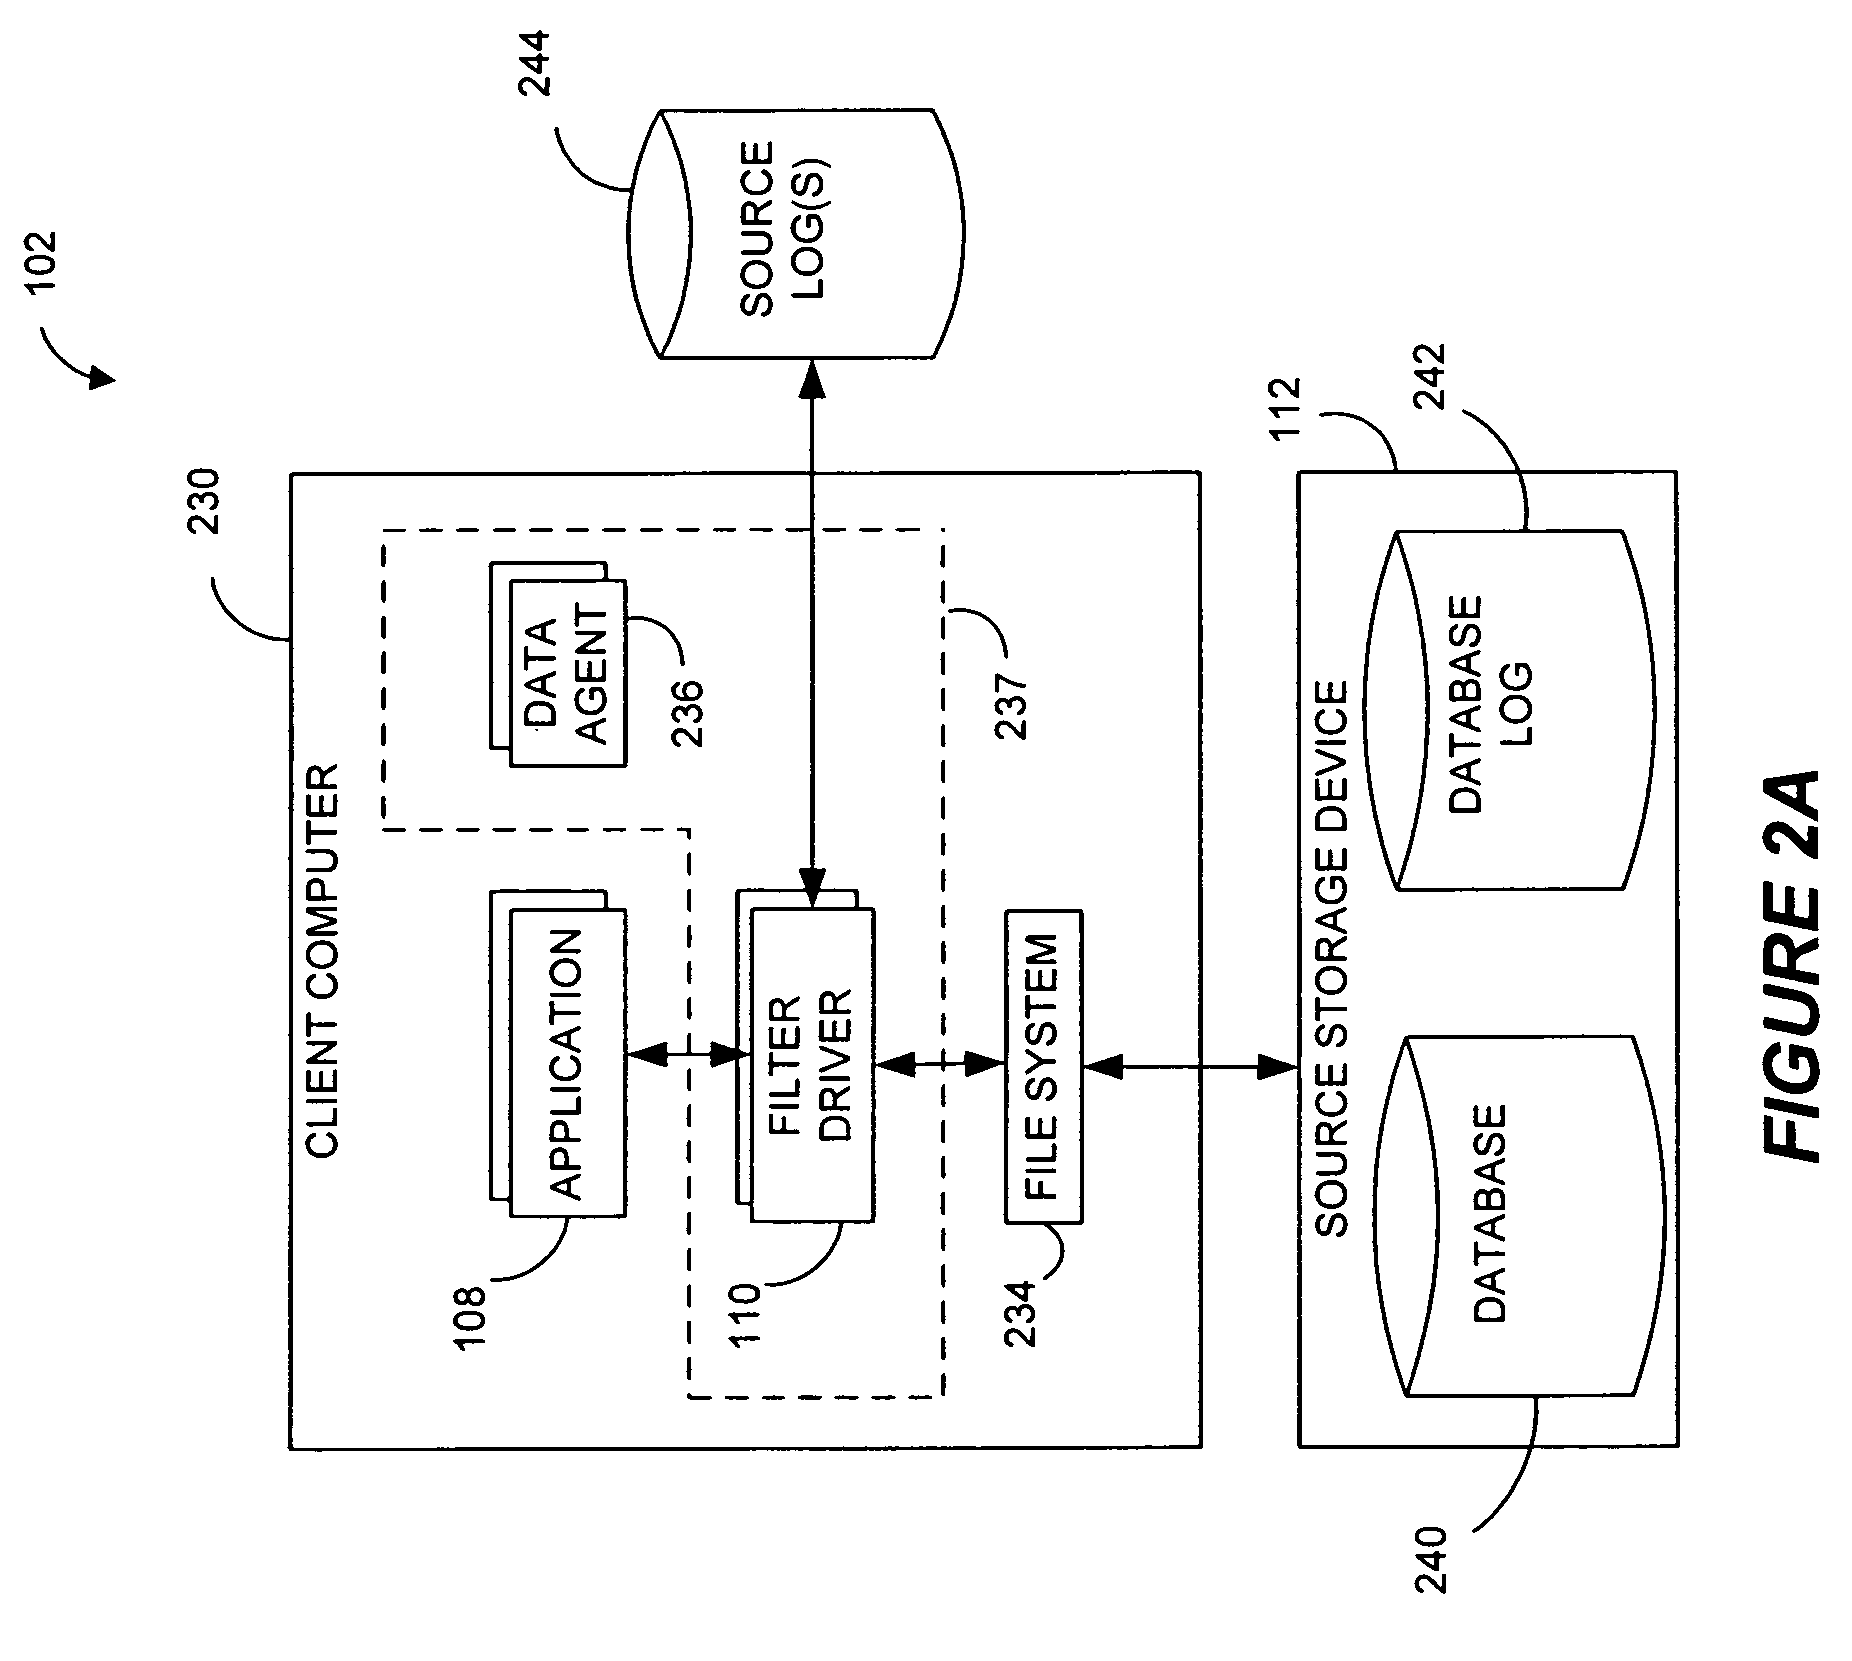 Systems and methods for monitoring application data in a data replication system